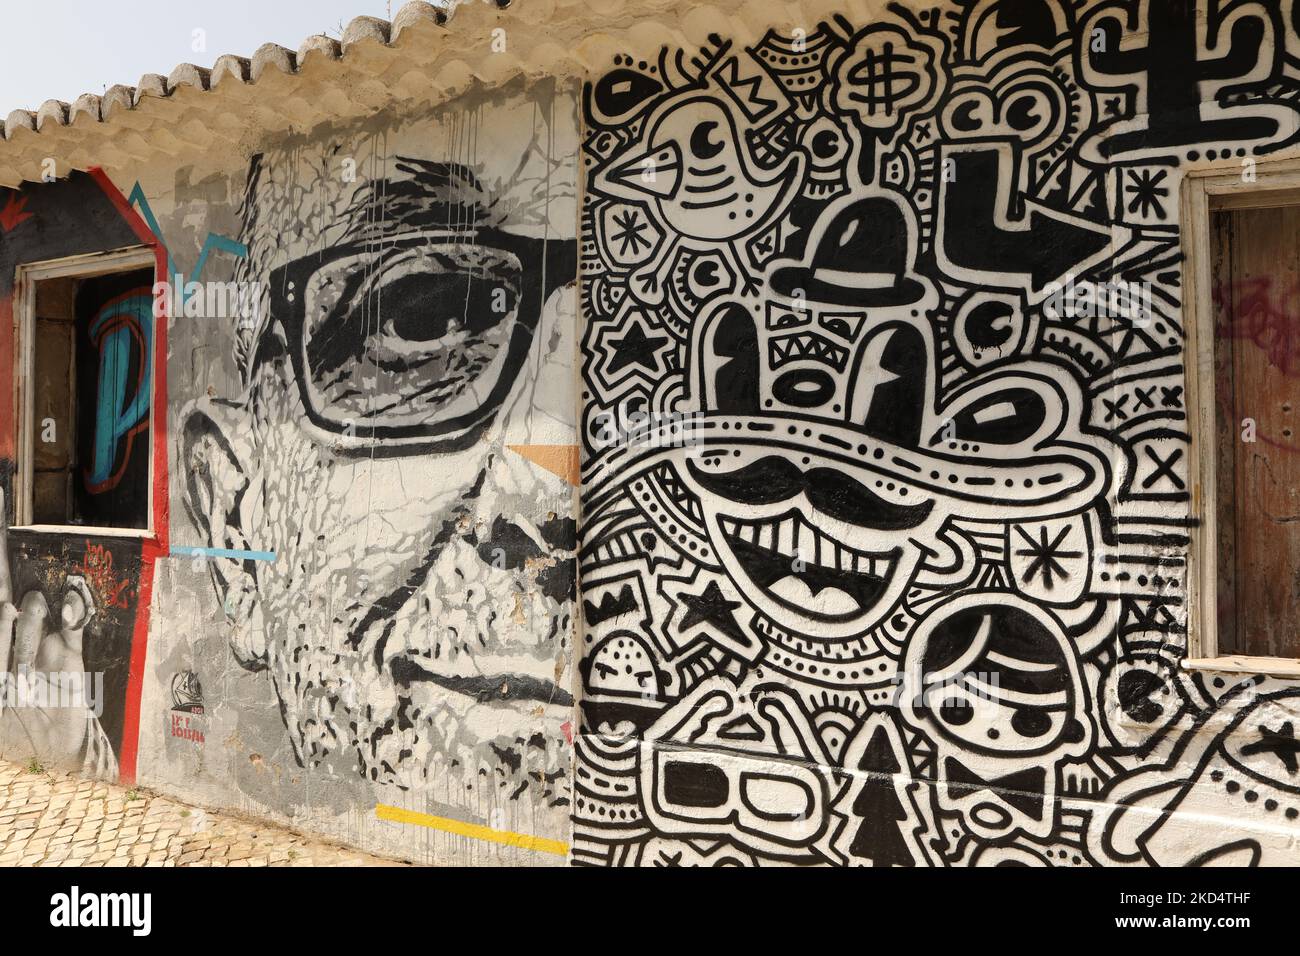 Street Art. A mural of a man wearing spectacles and a pop art mural. Lagos, Algarve, Portugal Stock Photo